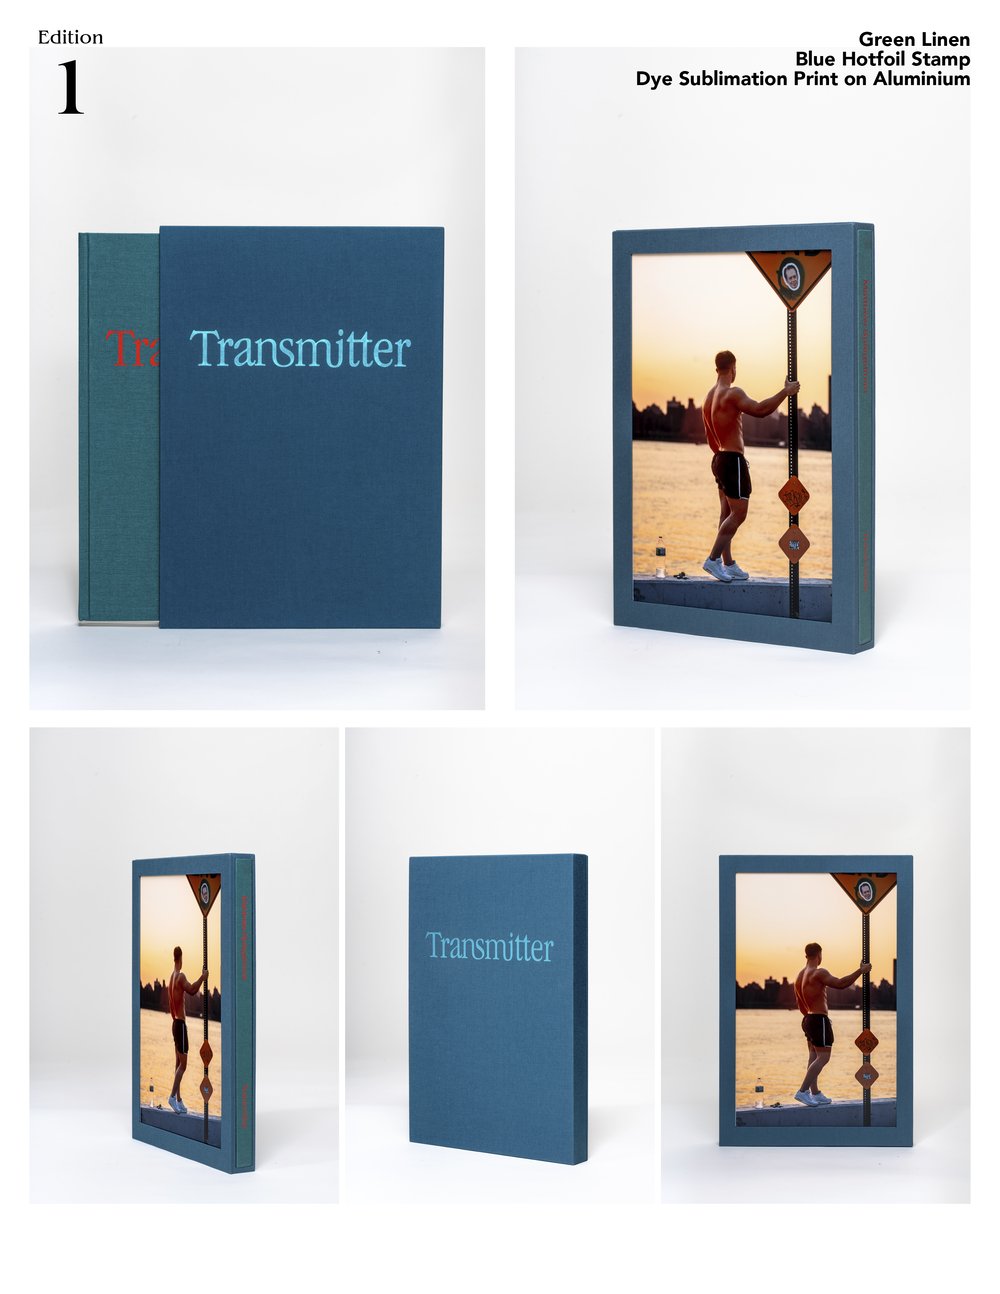 Transmitter Special Editions 1, 2, 3 - Multiple colors